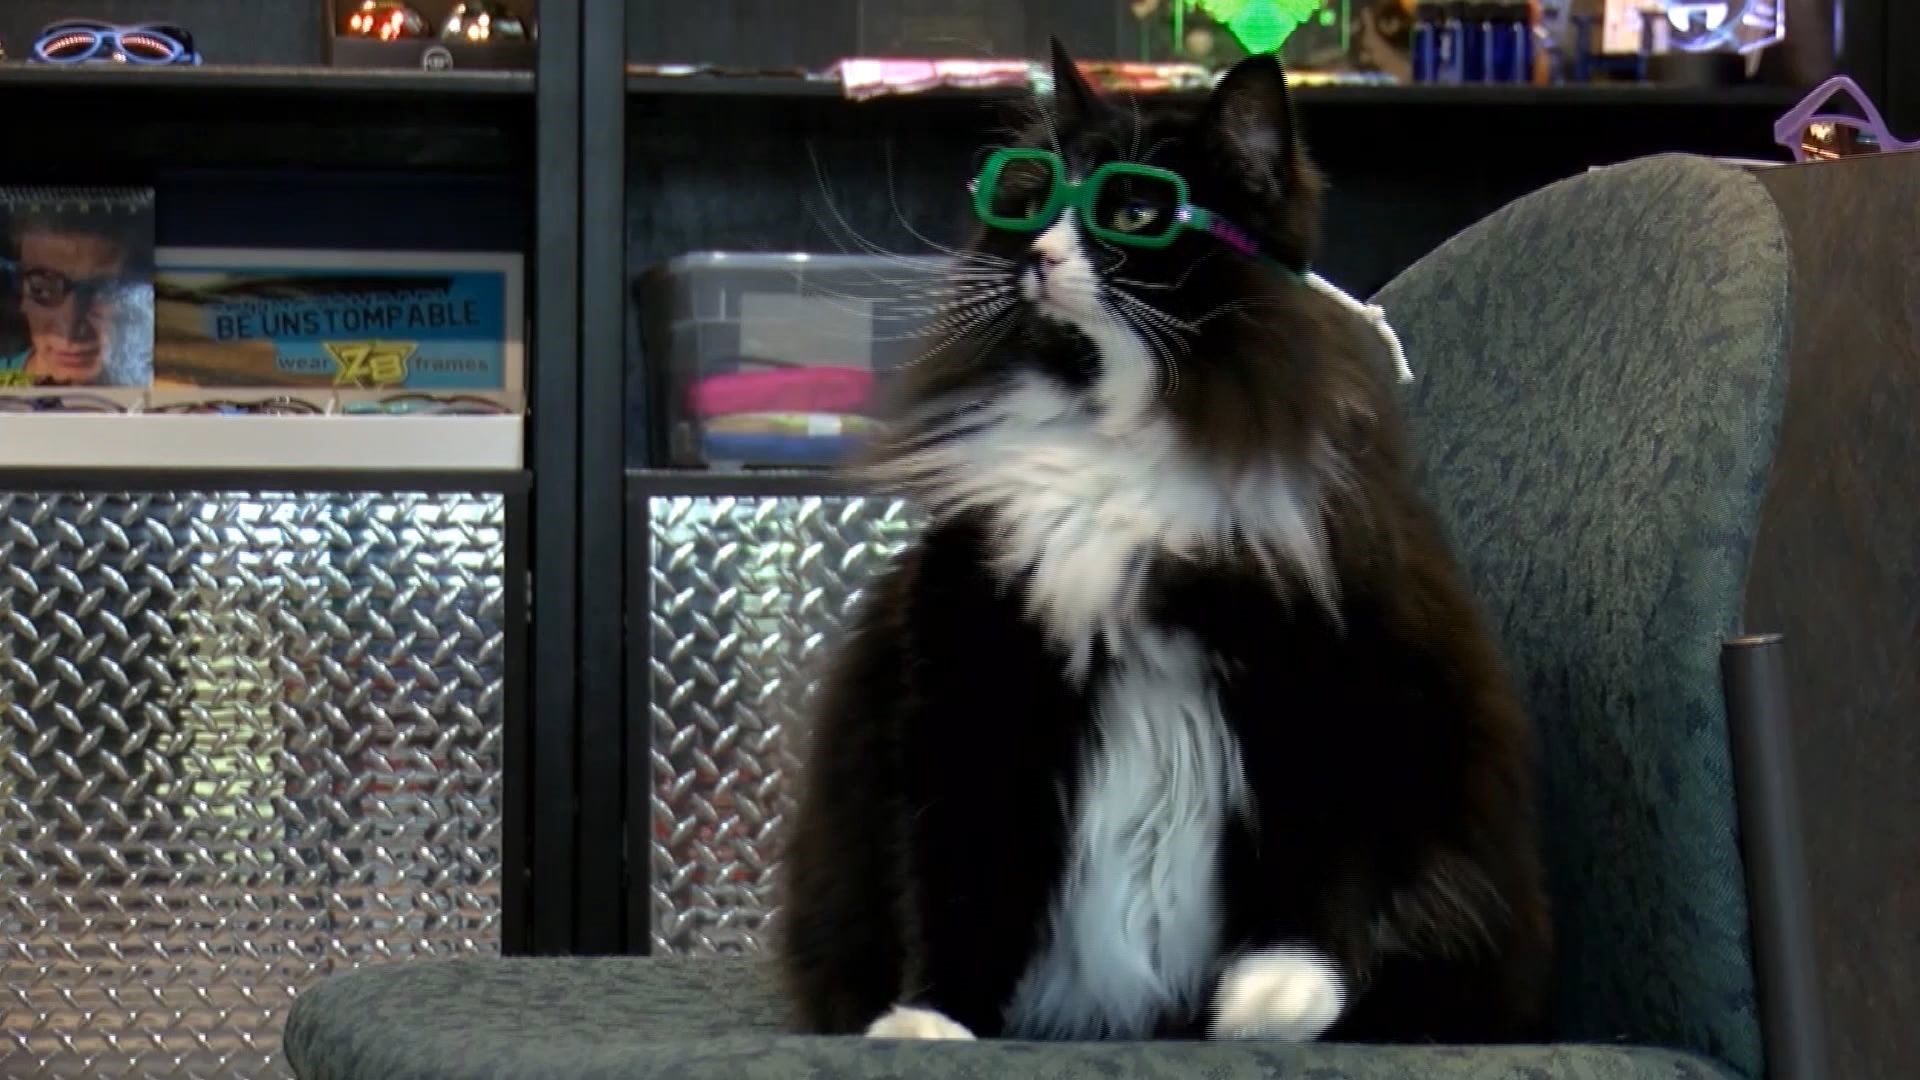 Truffles the cat works at a Pennsylvania eye doctor’s office, and she sports all kinds of eyewear as an example to children who need glasses.